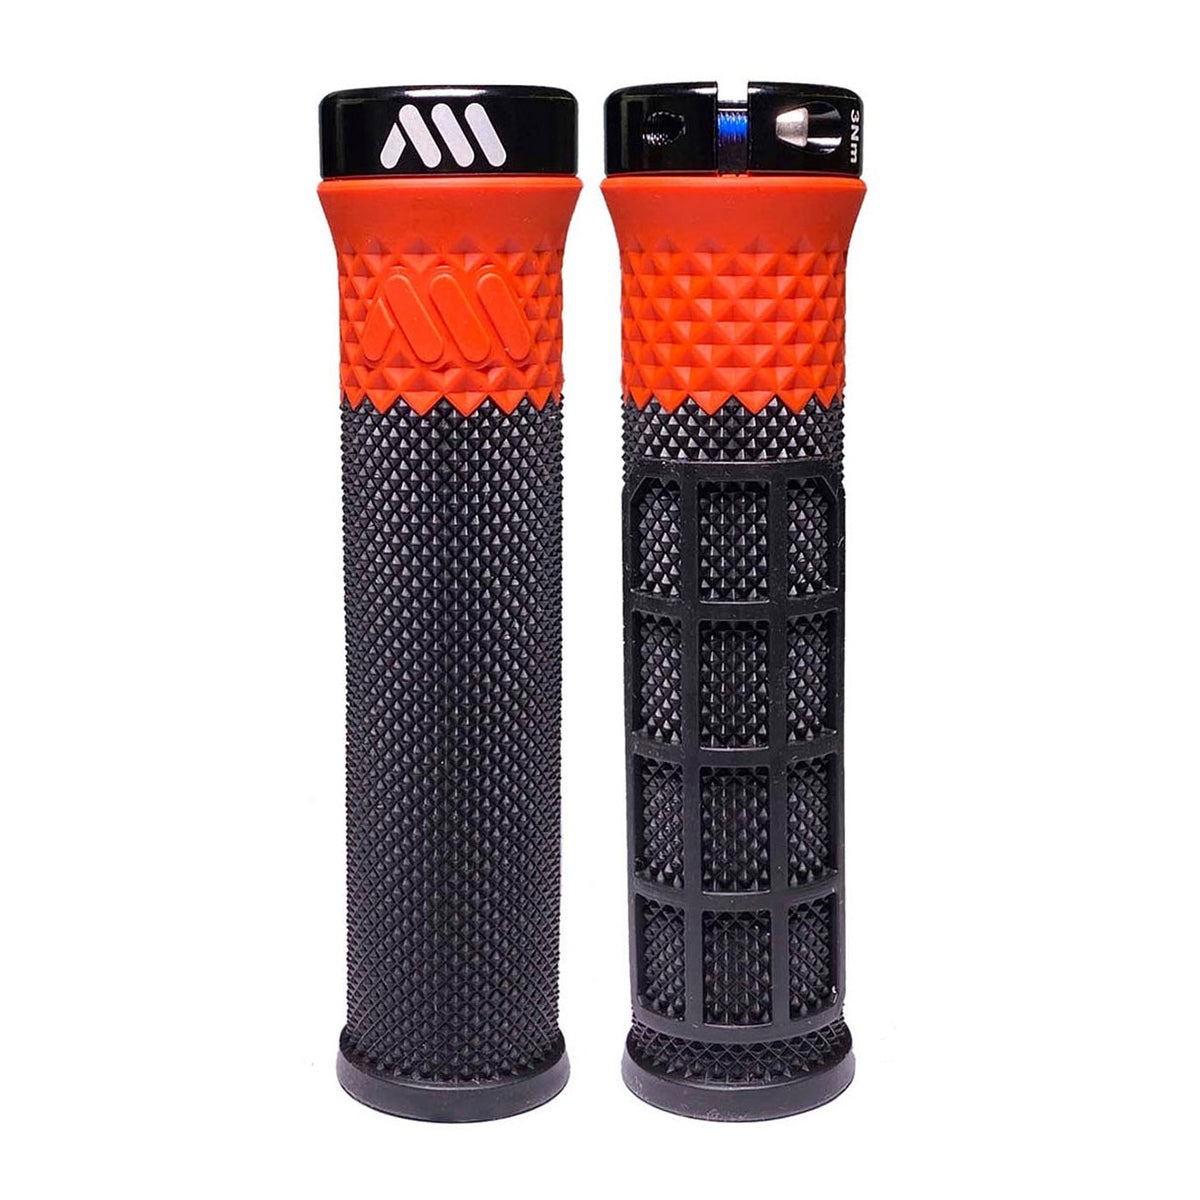 All Mountain Style Cero Single Clamp Lock On Grips - Black - Red